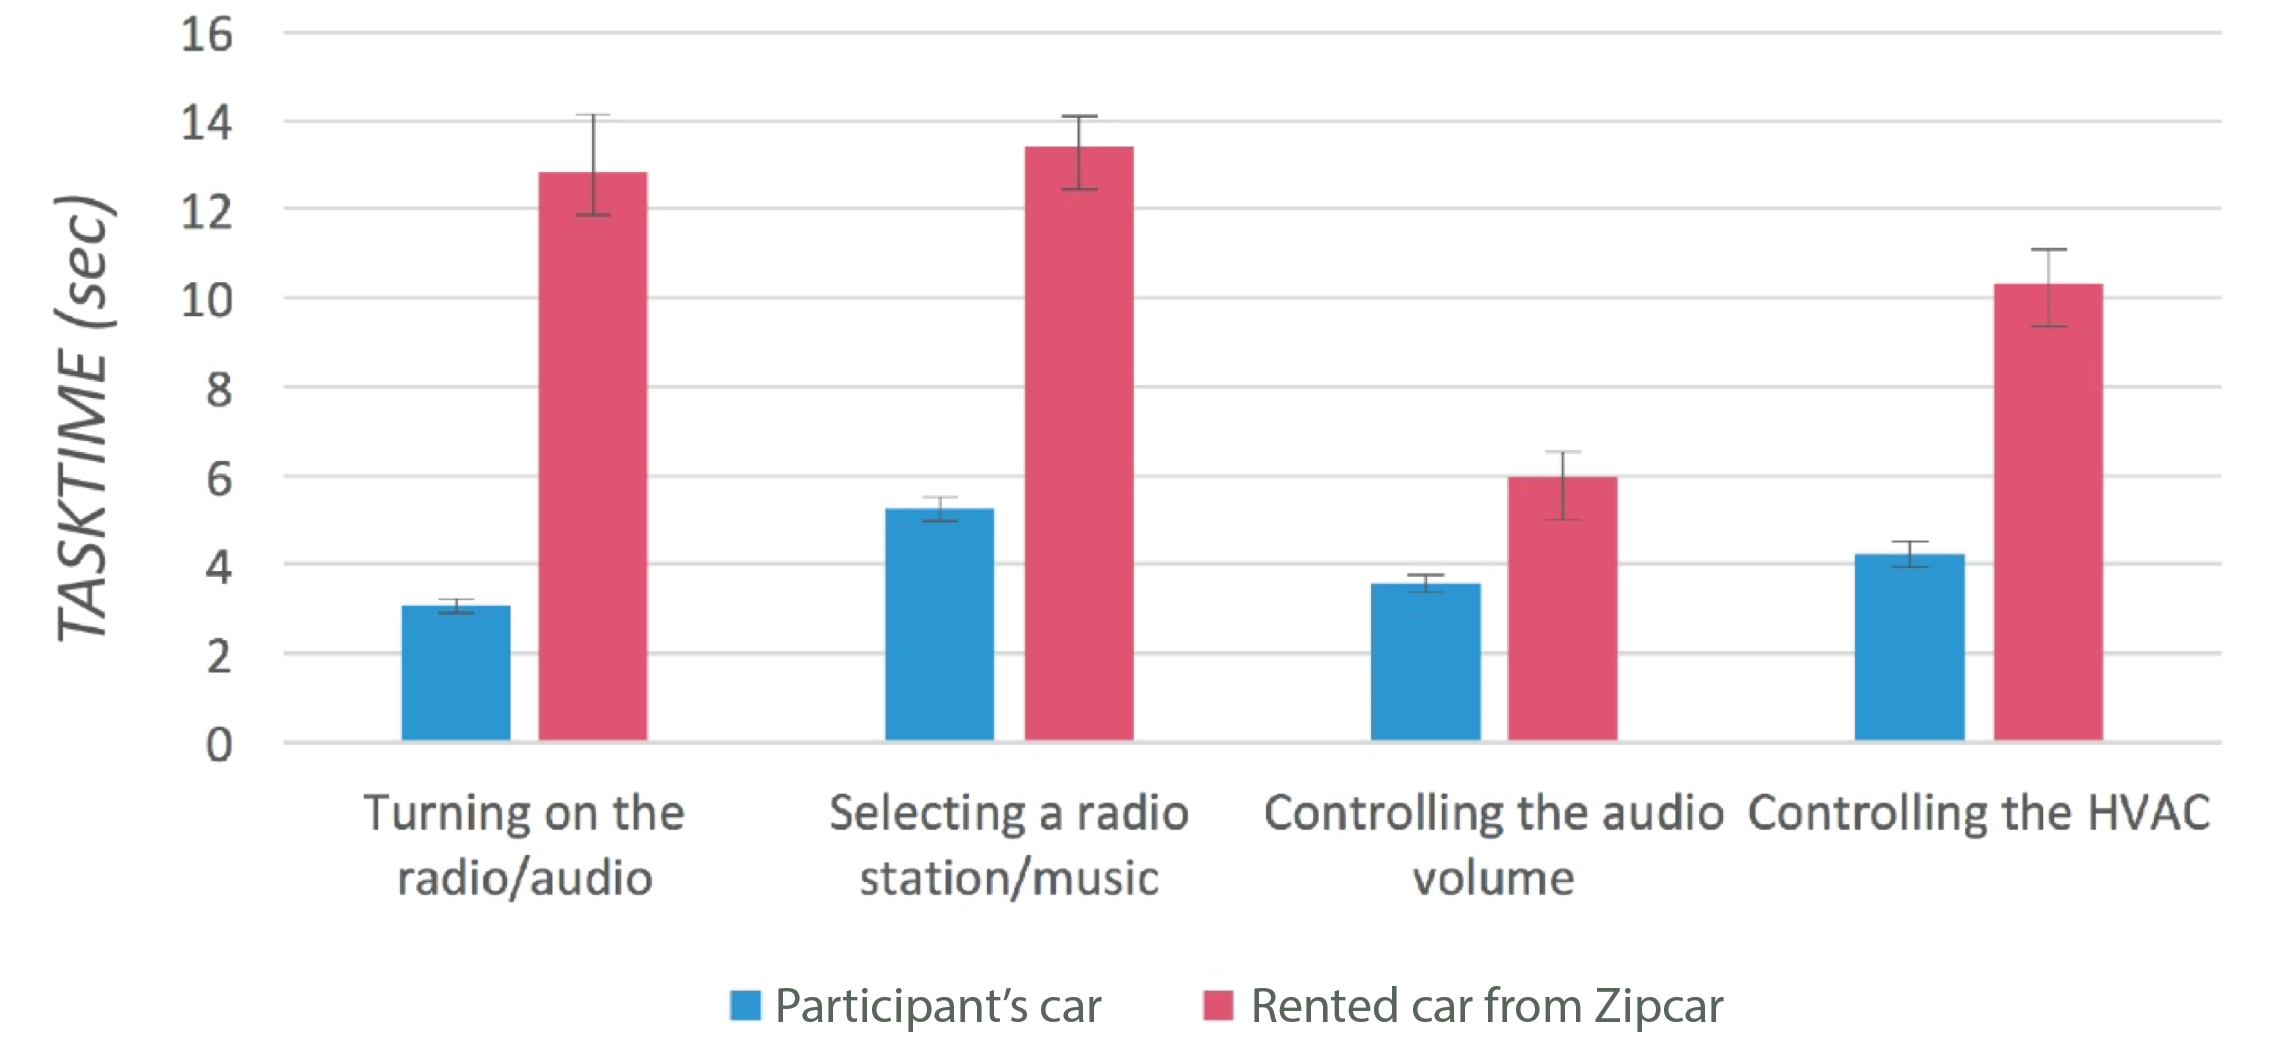 Bar chart showing that rented cars have higher task times than in the participant's own car.